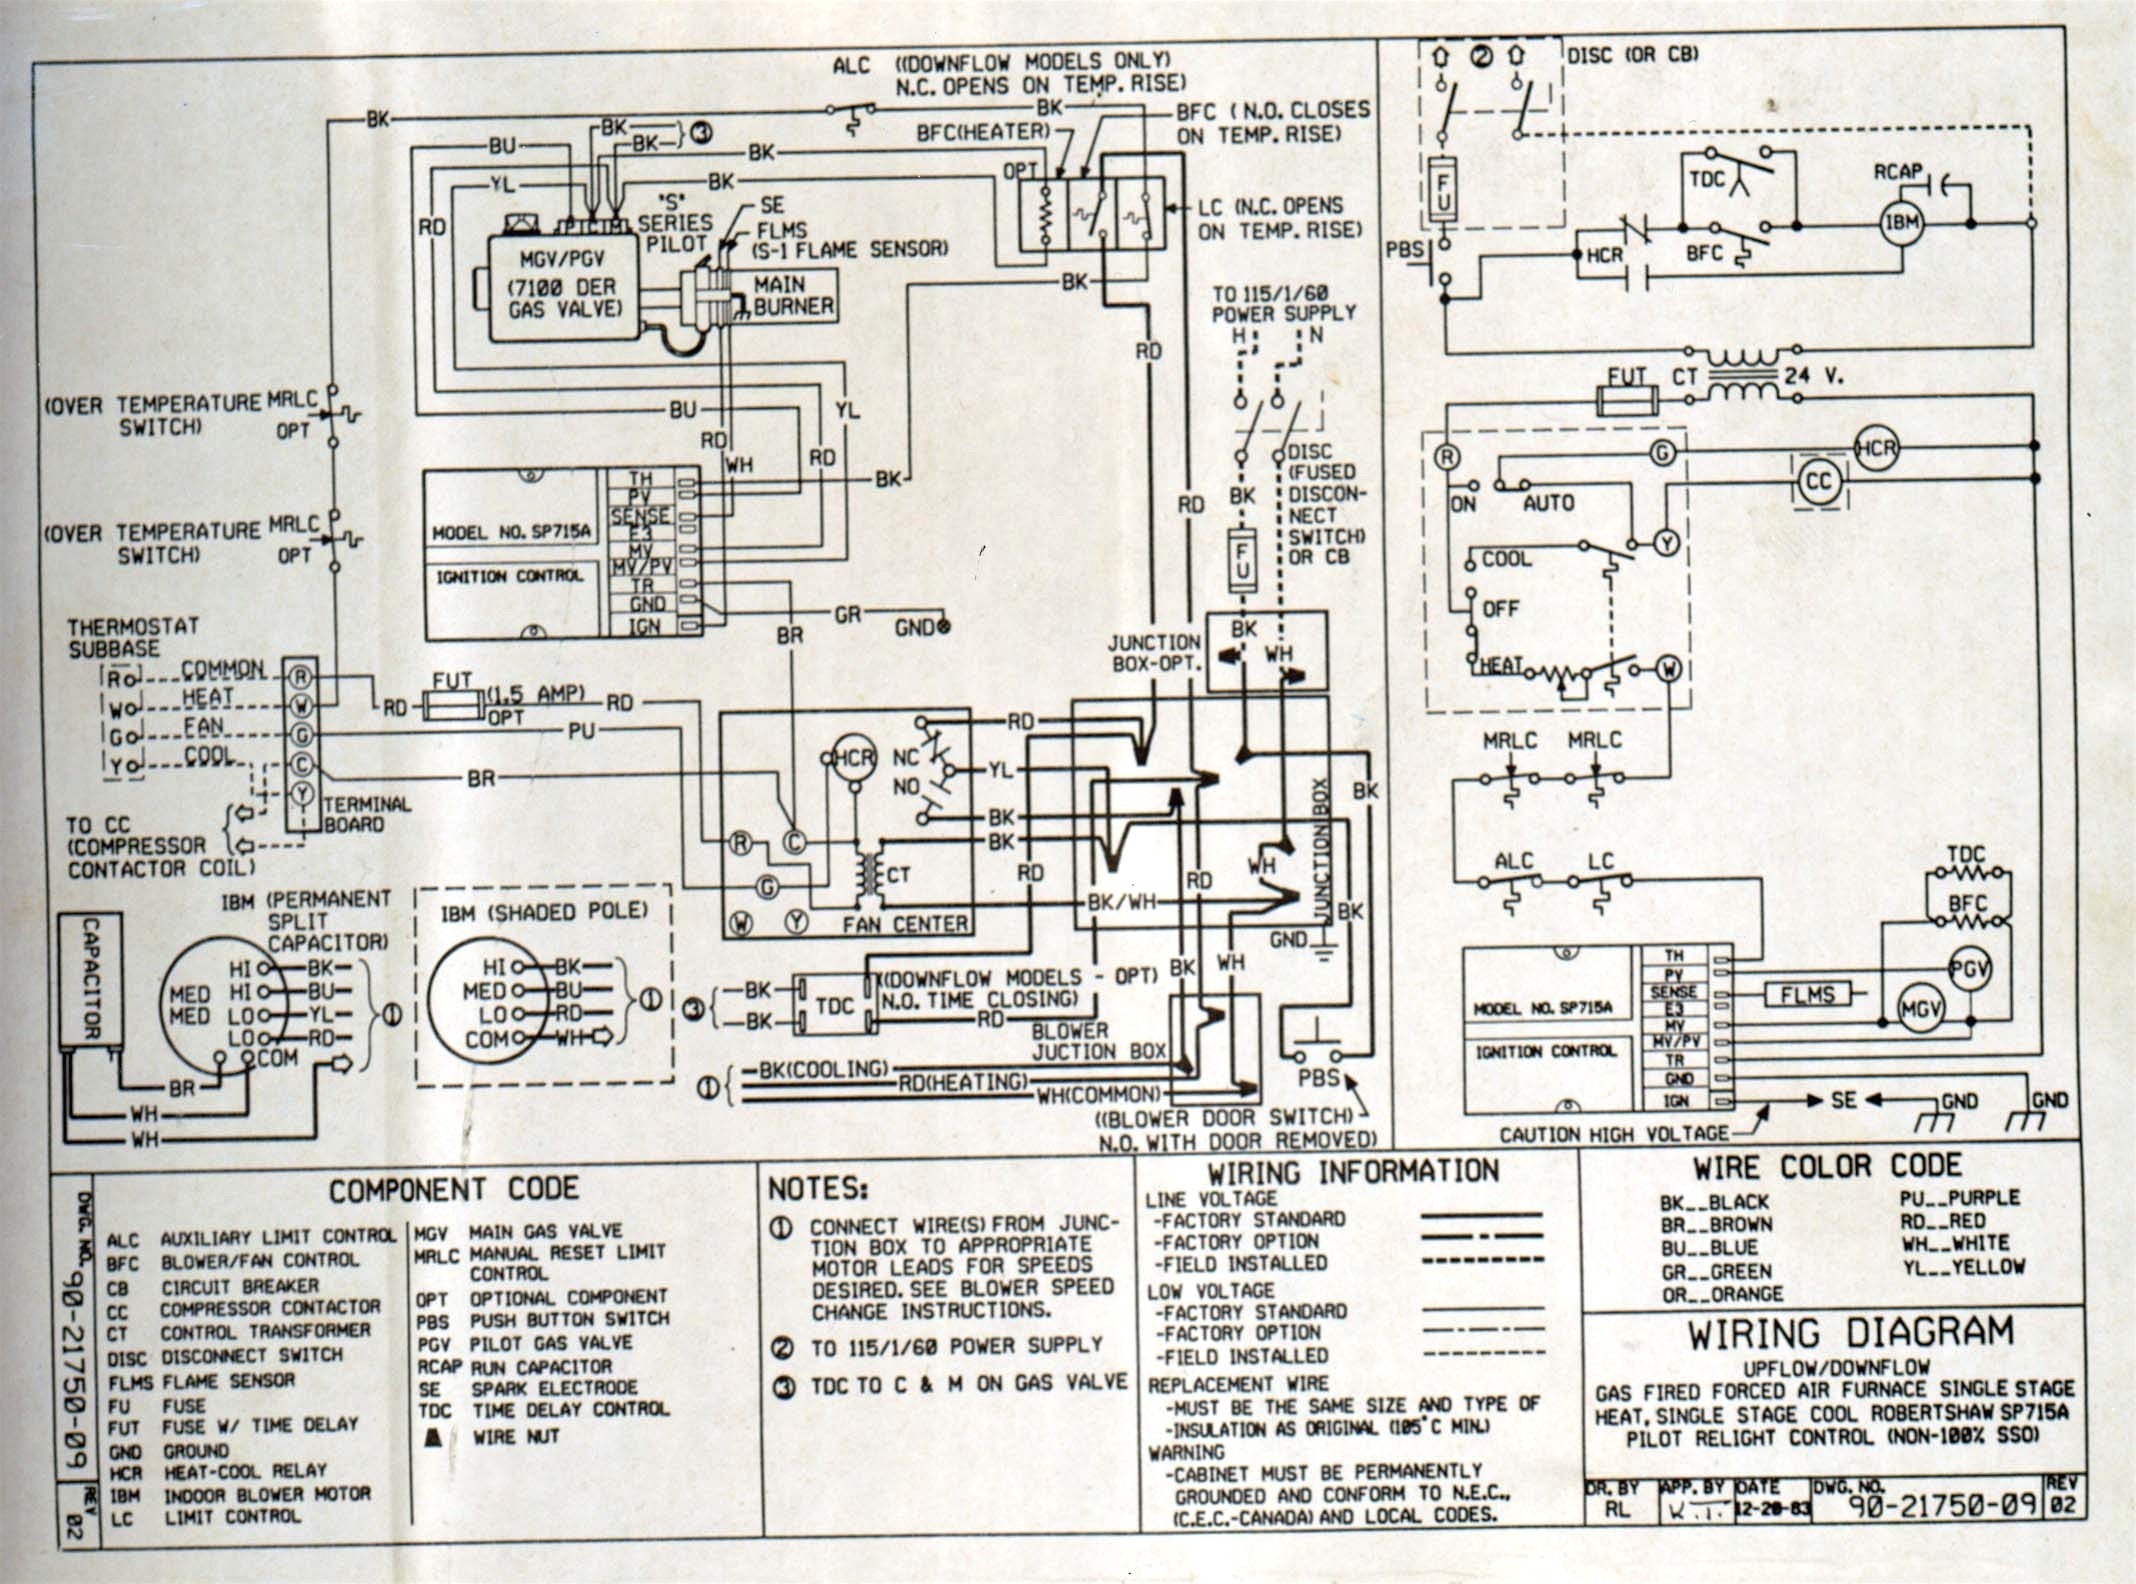 Carrier Air Conditioner Parts Diagram Electric Furnace Wiring Diagrams Detailed Schematic Diagrams Of Carrier Air Conditioner Parts Diagram